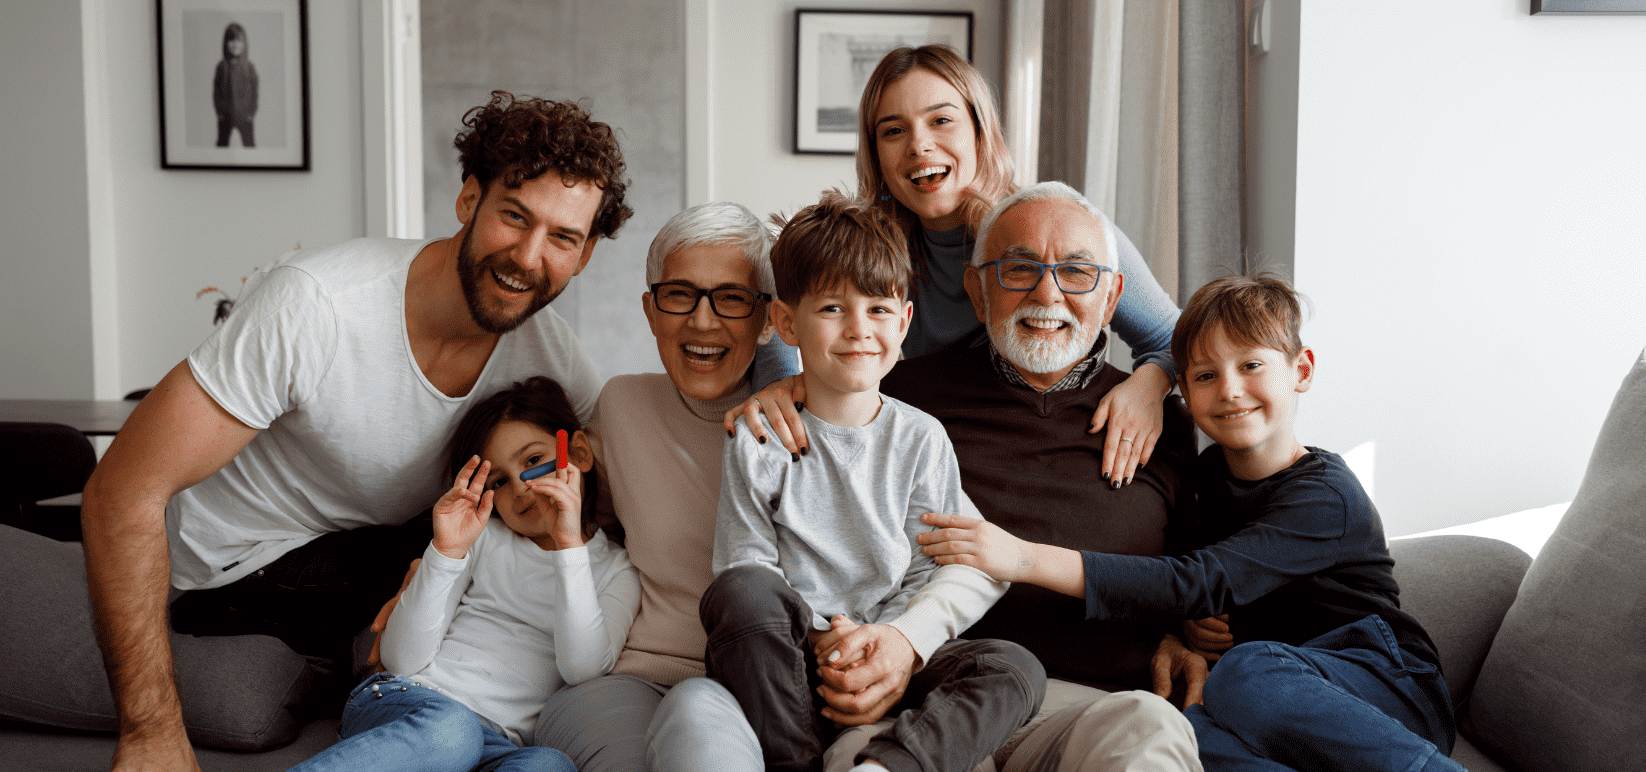 Family portrait with 3 generations where the grandparents are wearing glasses